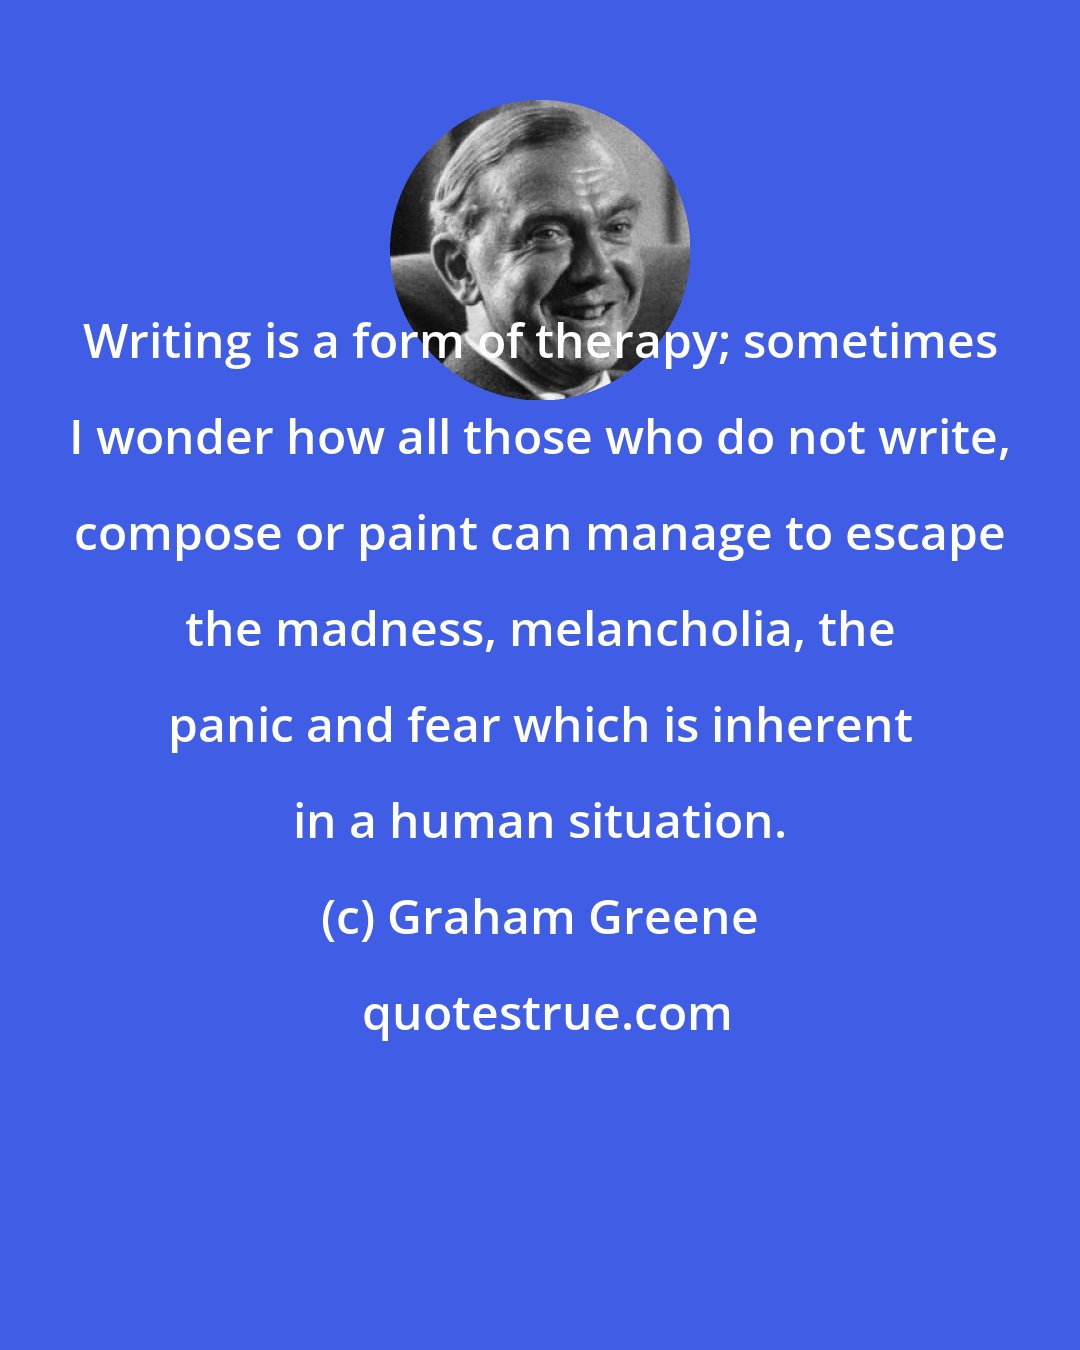 Graham Greene: Writing is a form of therapy; sometimes I wonder how all those who do not write, compose or paint can manage to escape the madness, melancholia, the panic and fear which is inherent in a human situation.